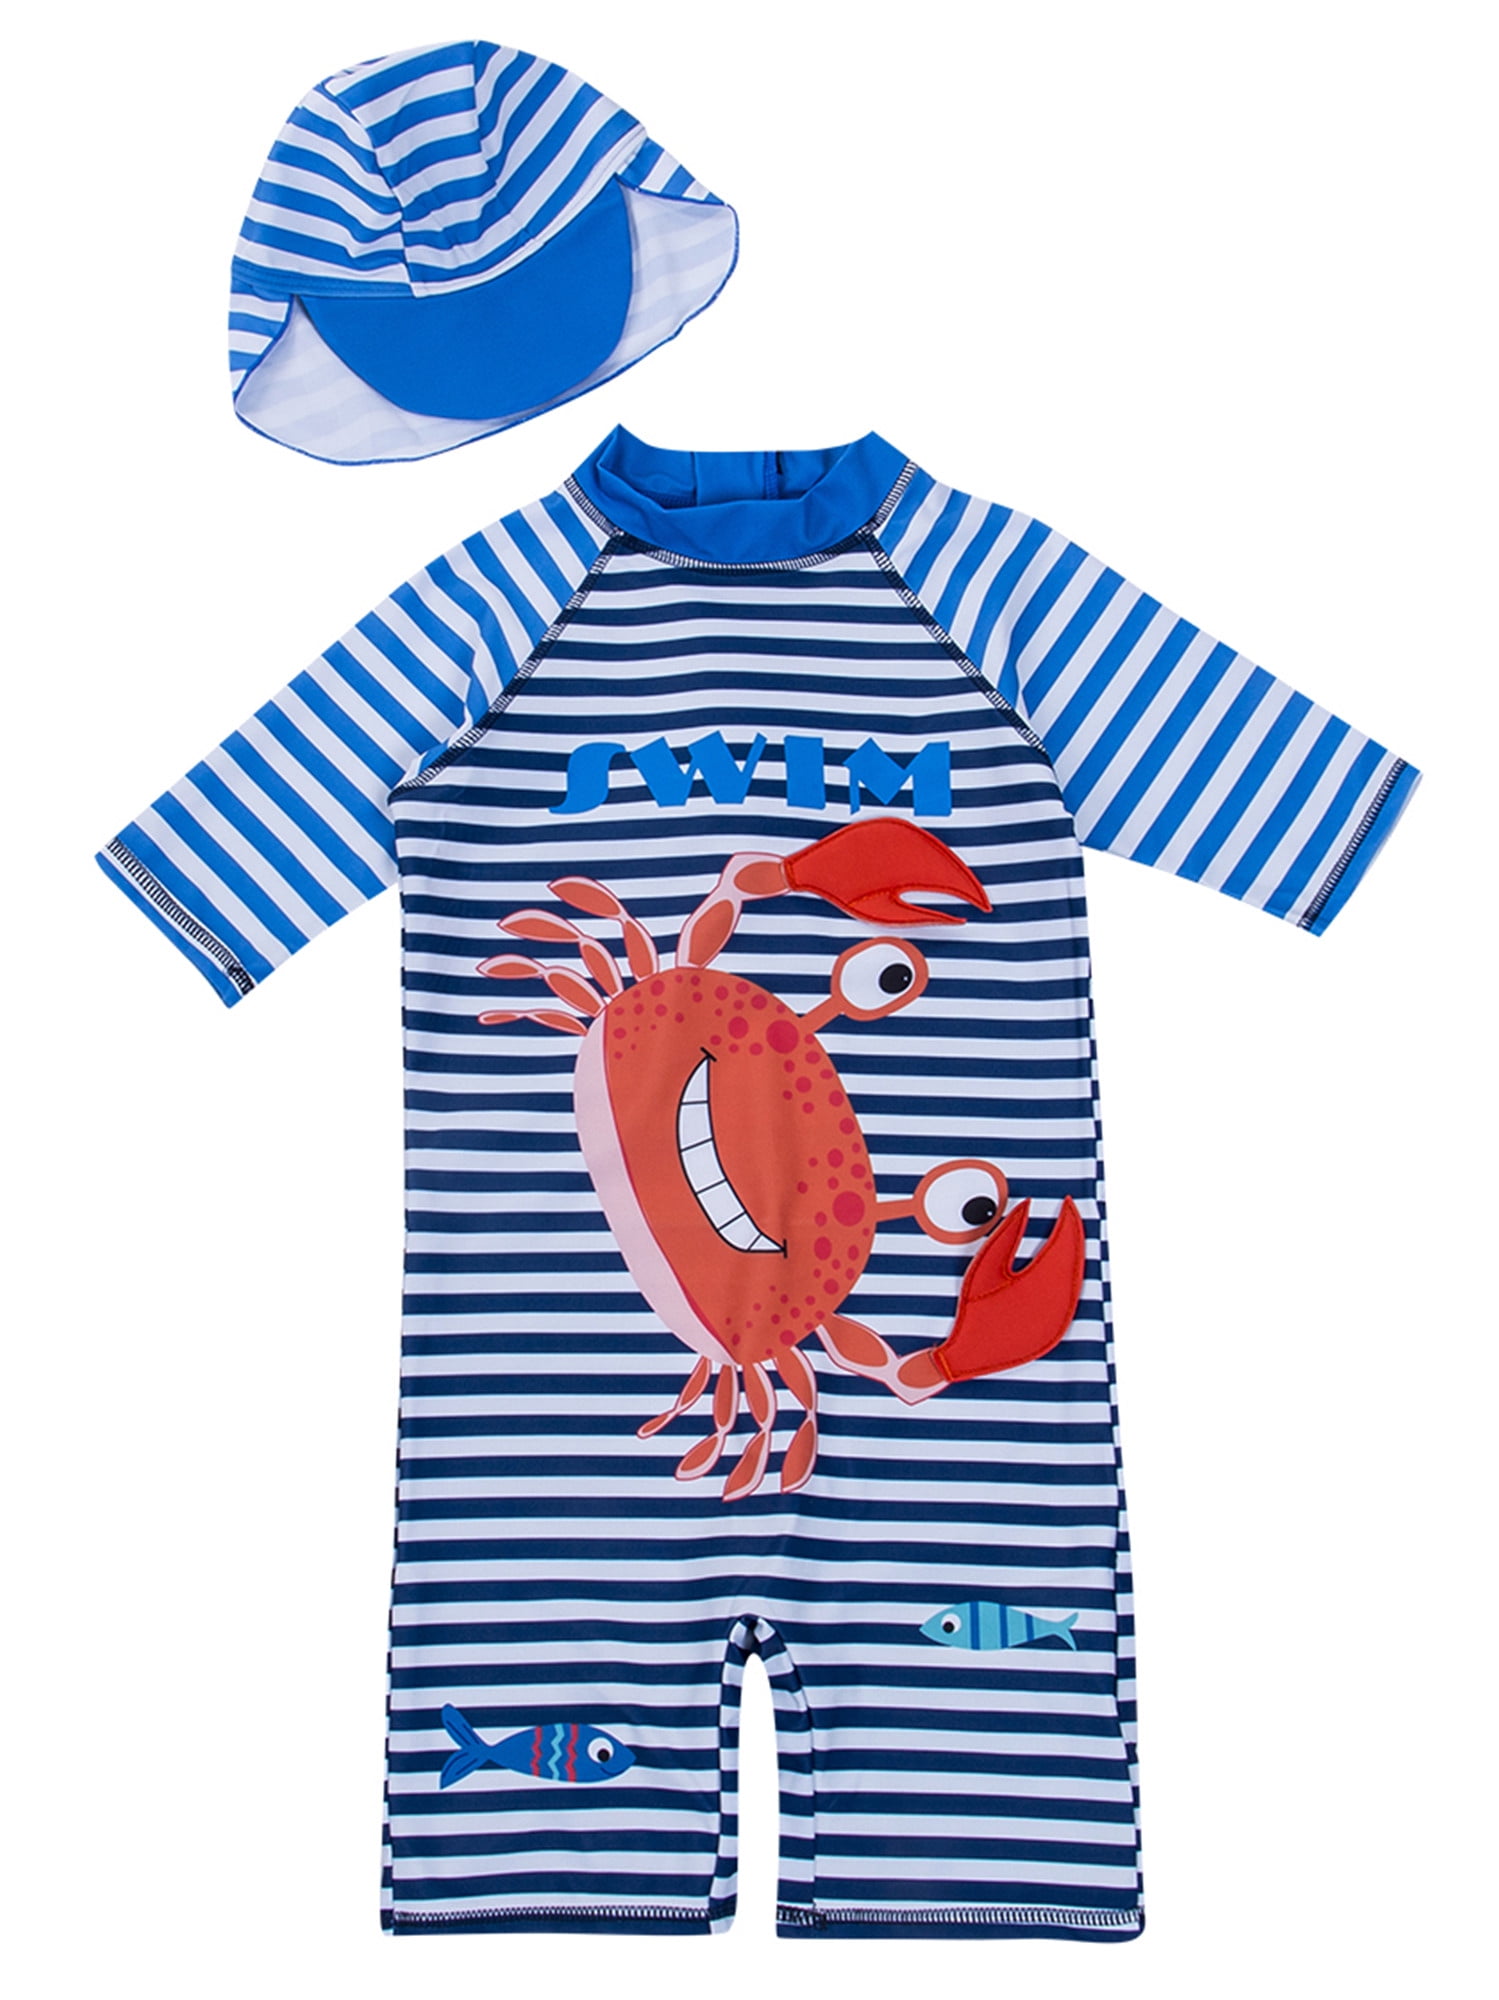 Baby Boys Swimsuit,All-in-One Rash Guard Sun Protection Quick-Drying Surfing Swimwear with Hat Crab Style